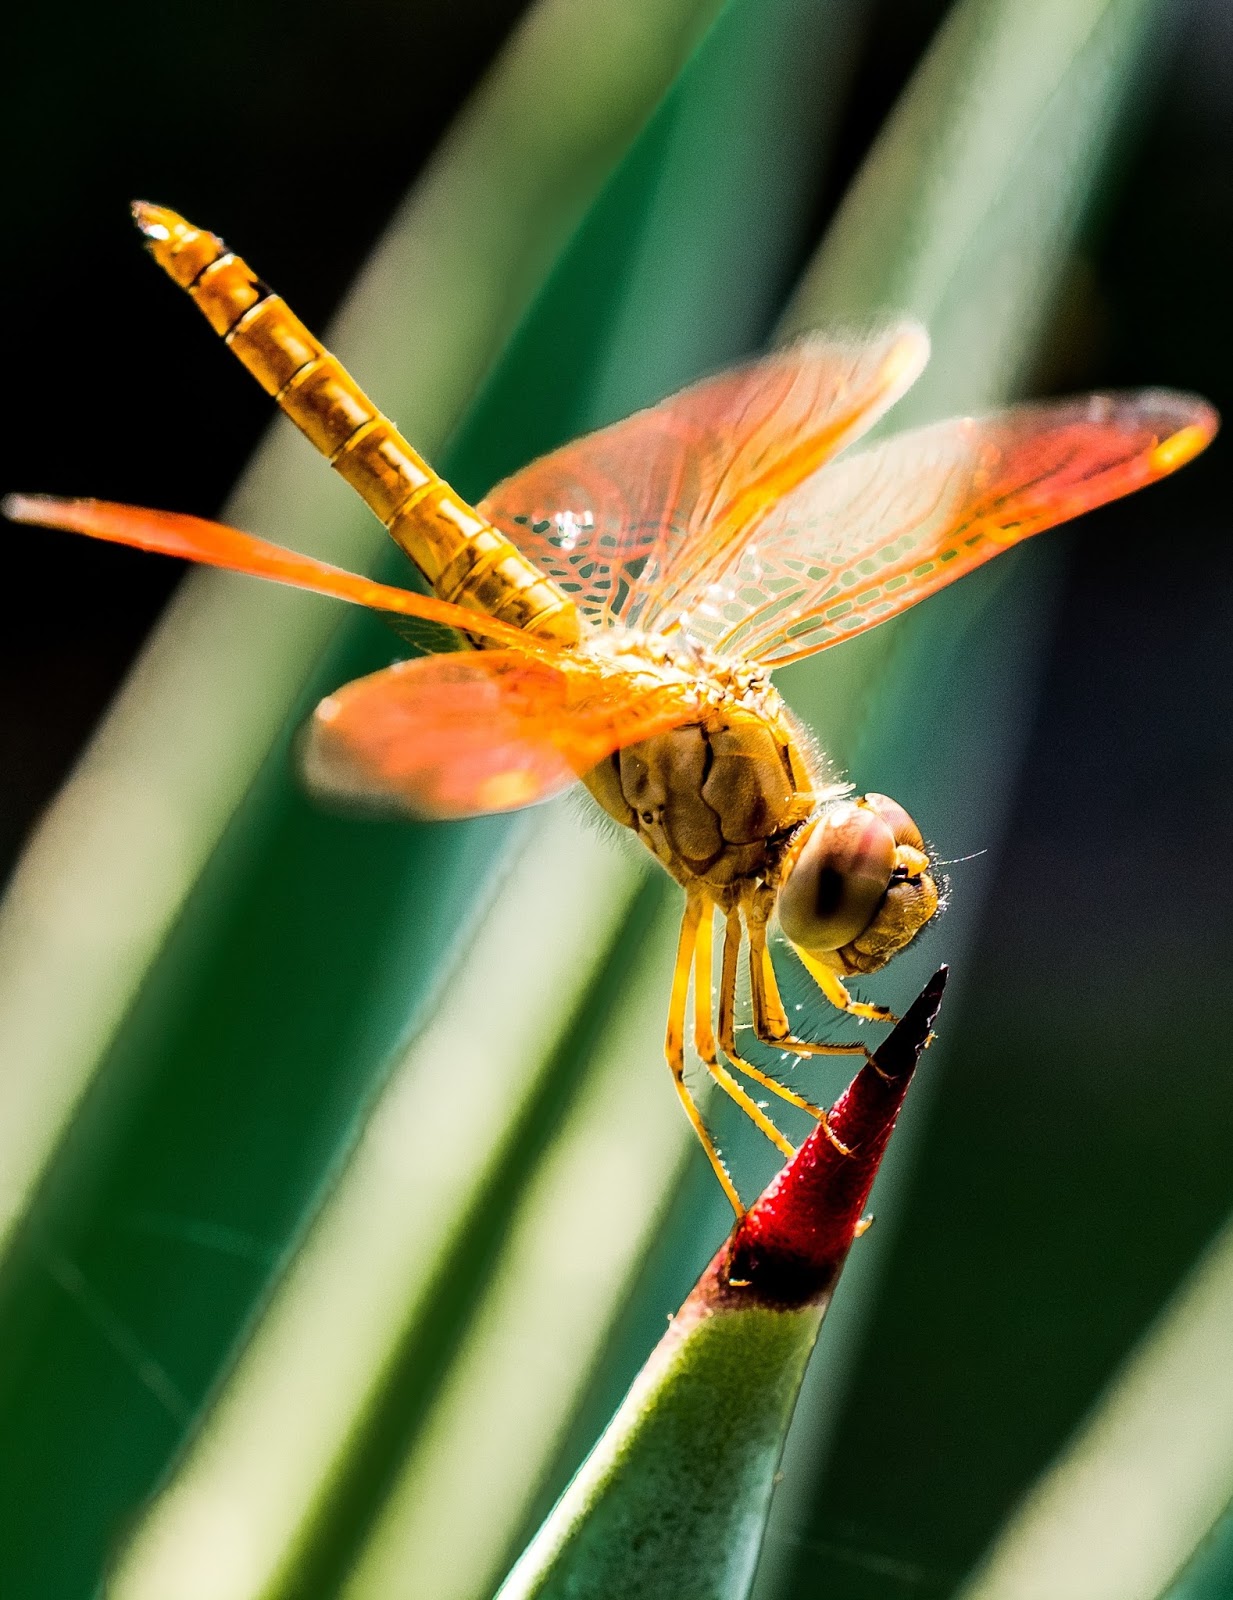 Picture of a colorful dragonfly insect - About Wild Animals